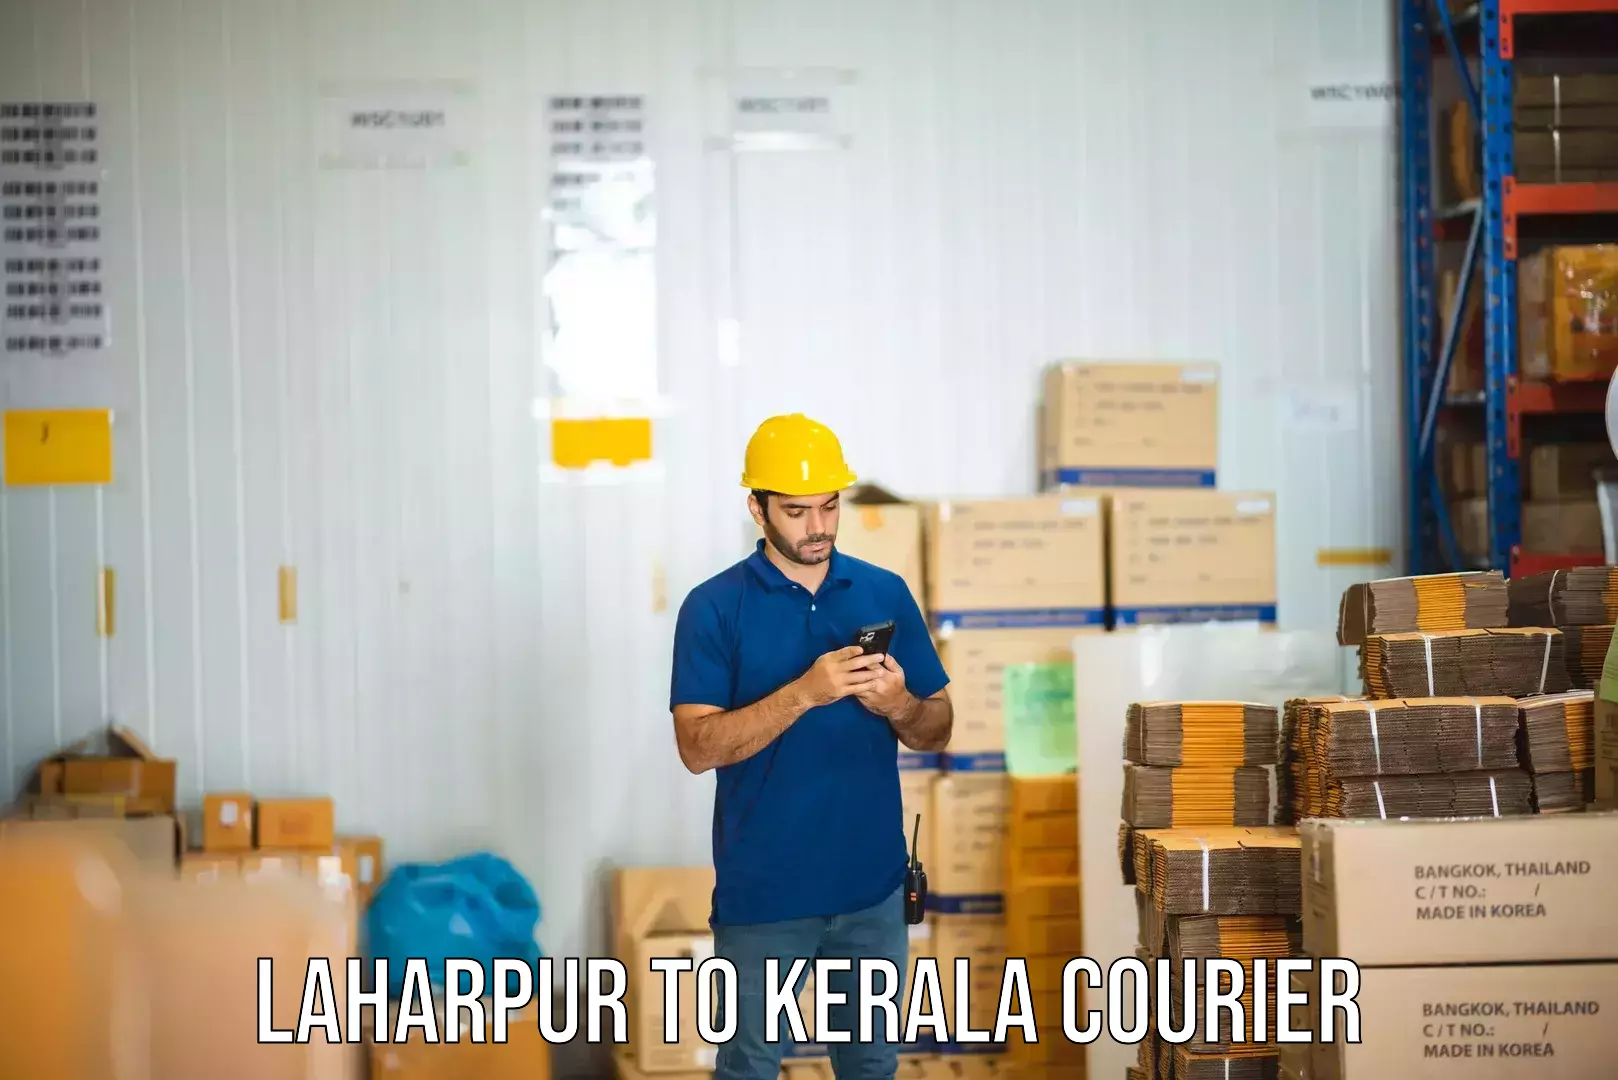 Affordable parcel service Laharpur to Balussery